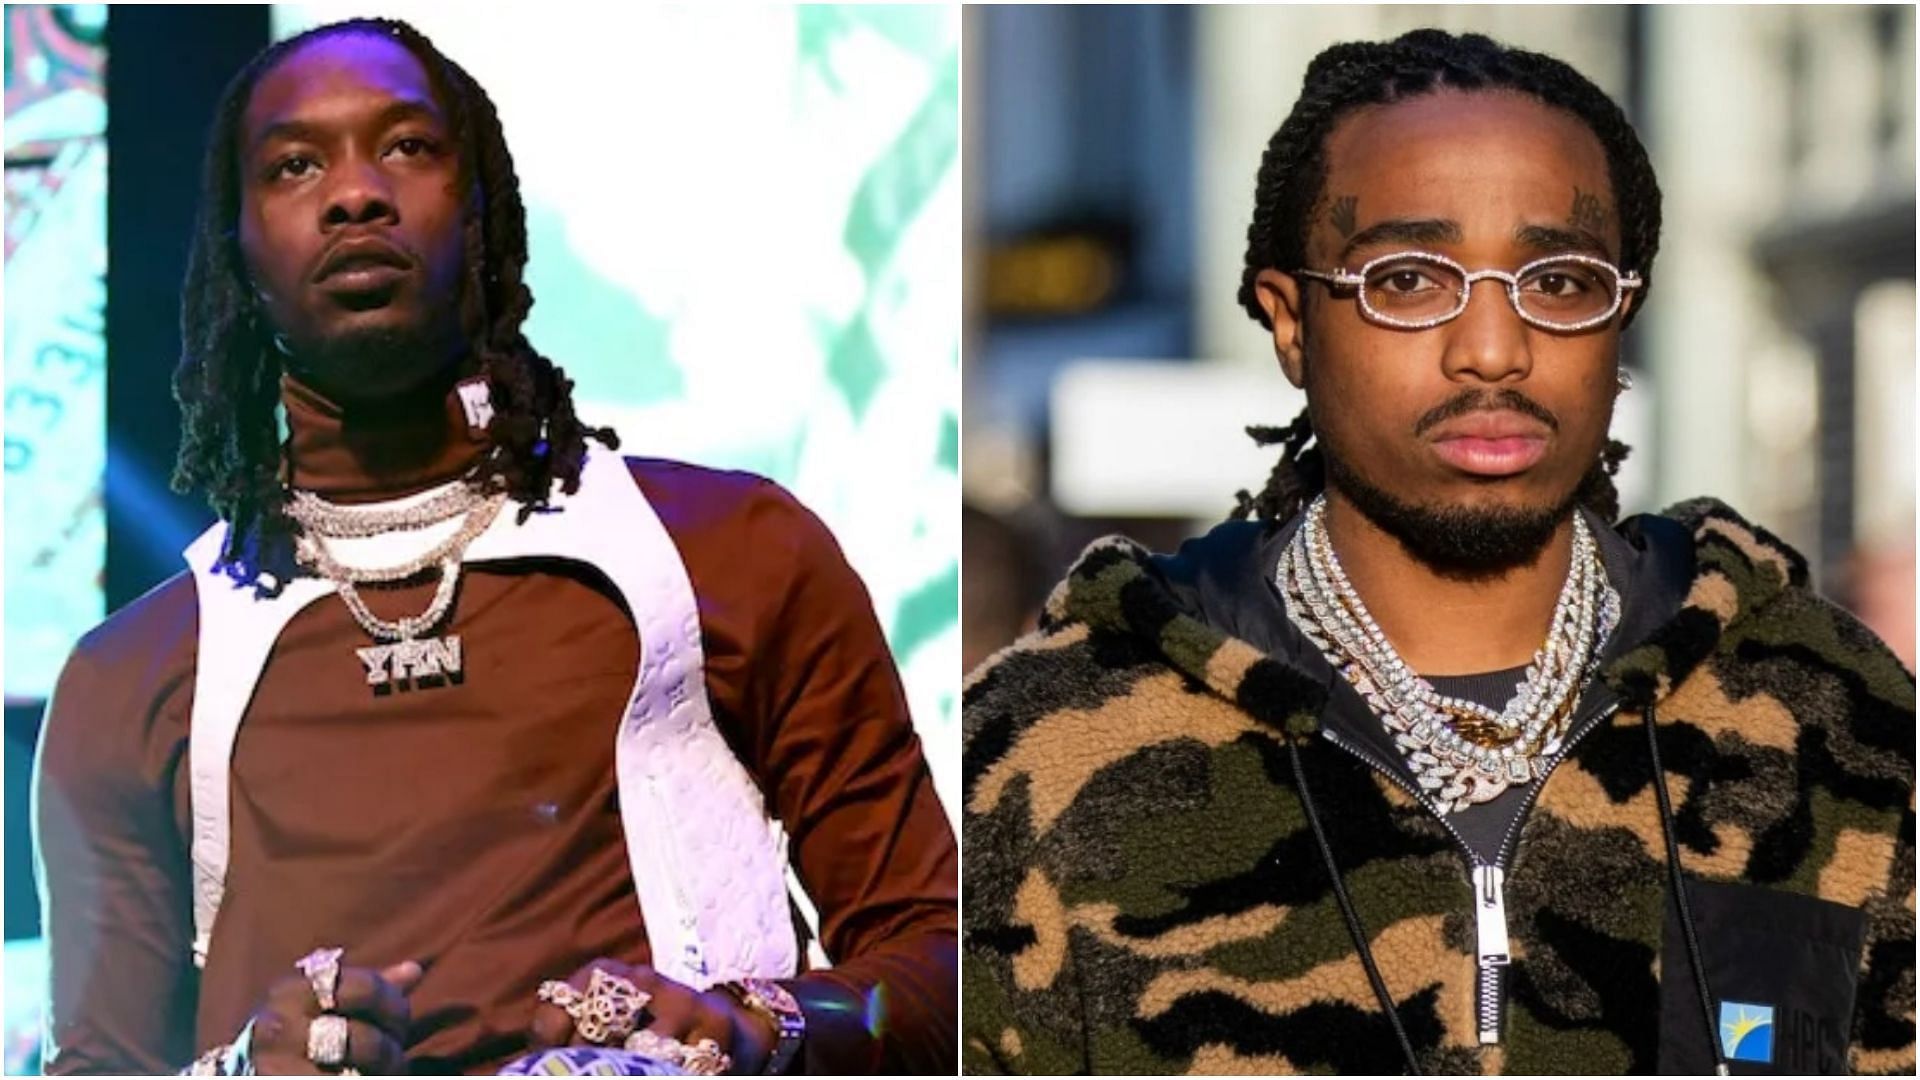 Offset and Quavo gave speeched at Takeoff